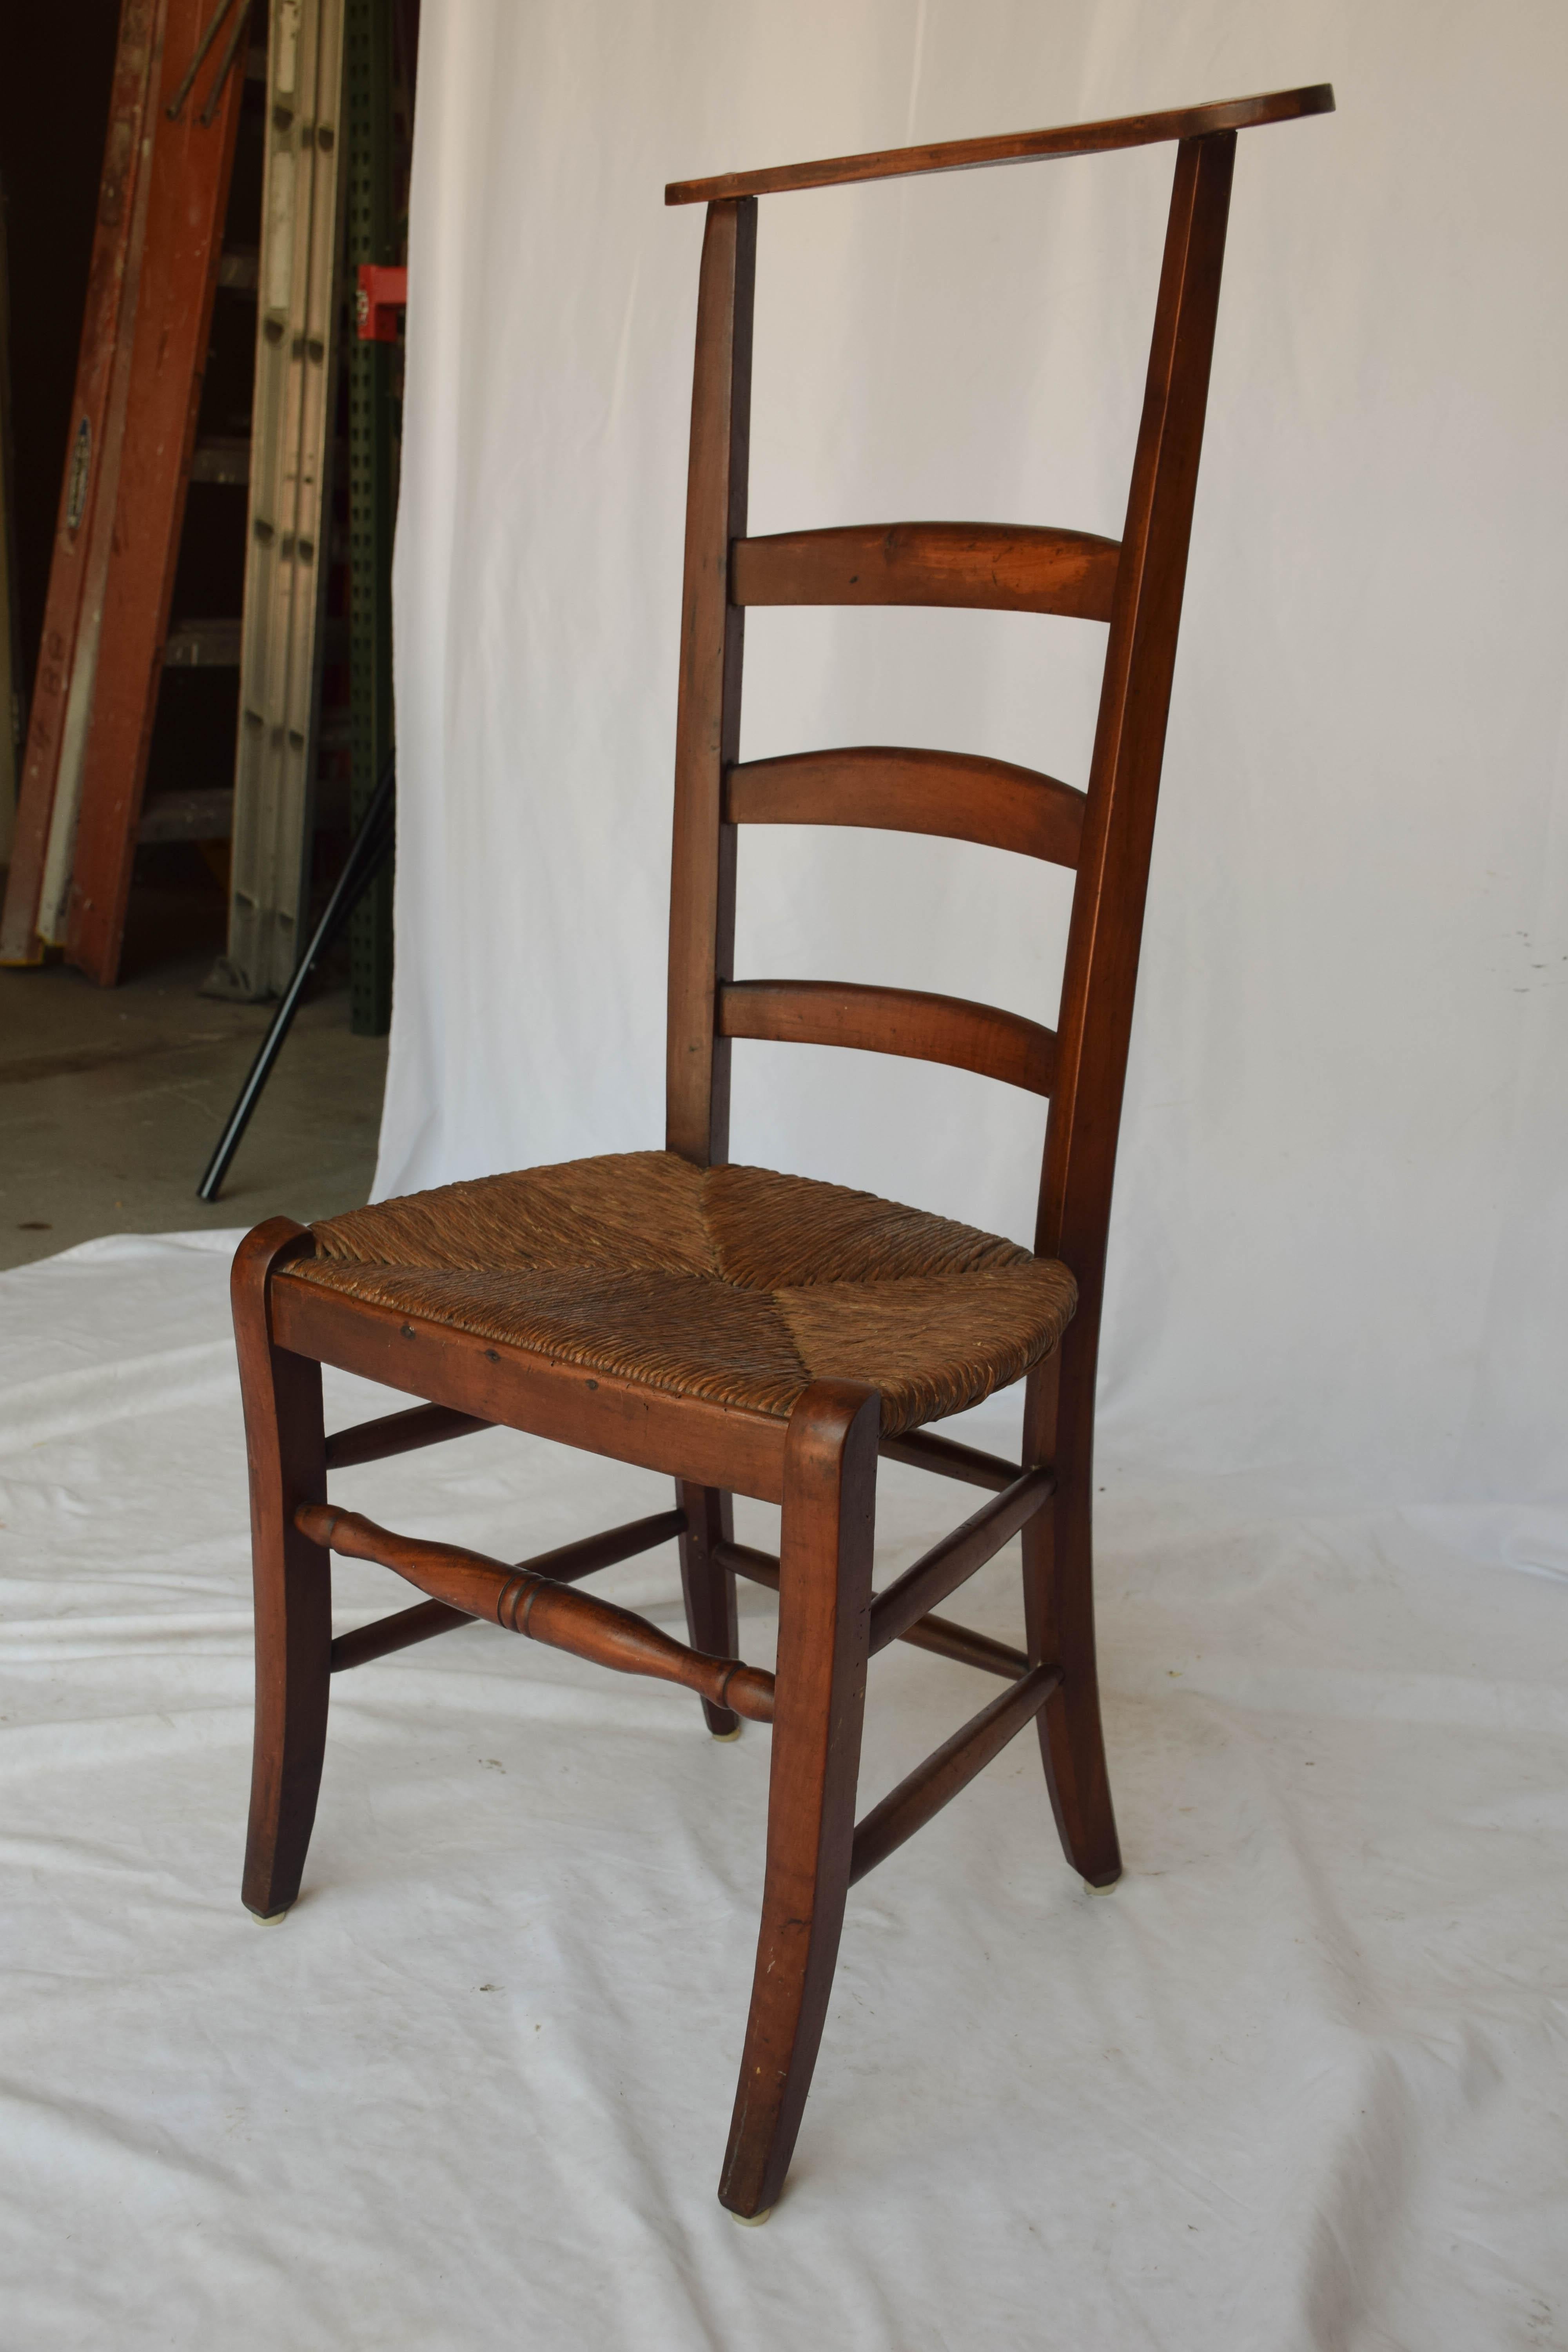 19th century Prie-Dieu, prayer chair from France, handcrafted with a rush seat. This charming prie dieu was once used in a French church as both chair and kneeler. This piece will surely add provincial charm to your home. Though not as noble as its